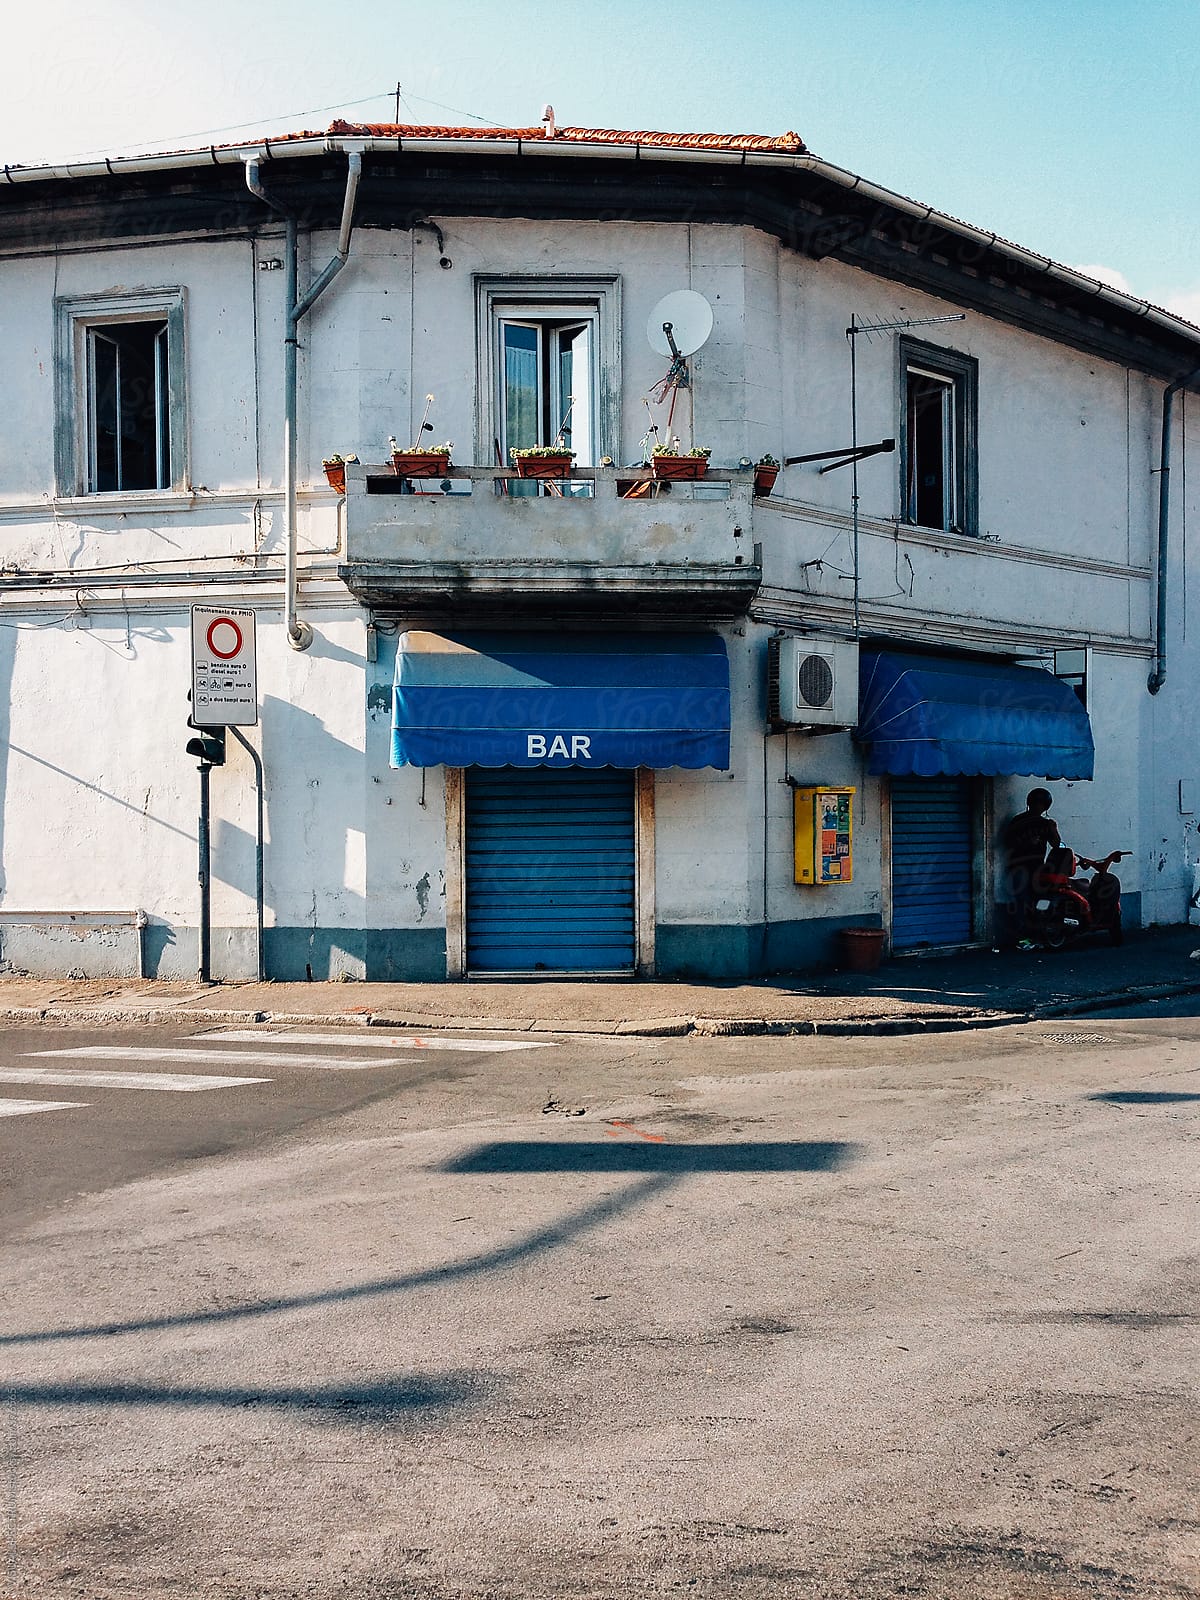 Old-Fashioned Roadside Bar in Italy